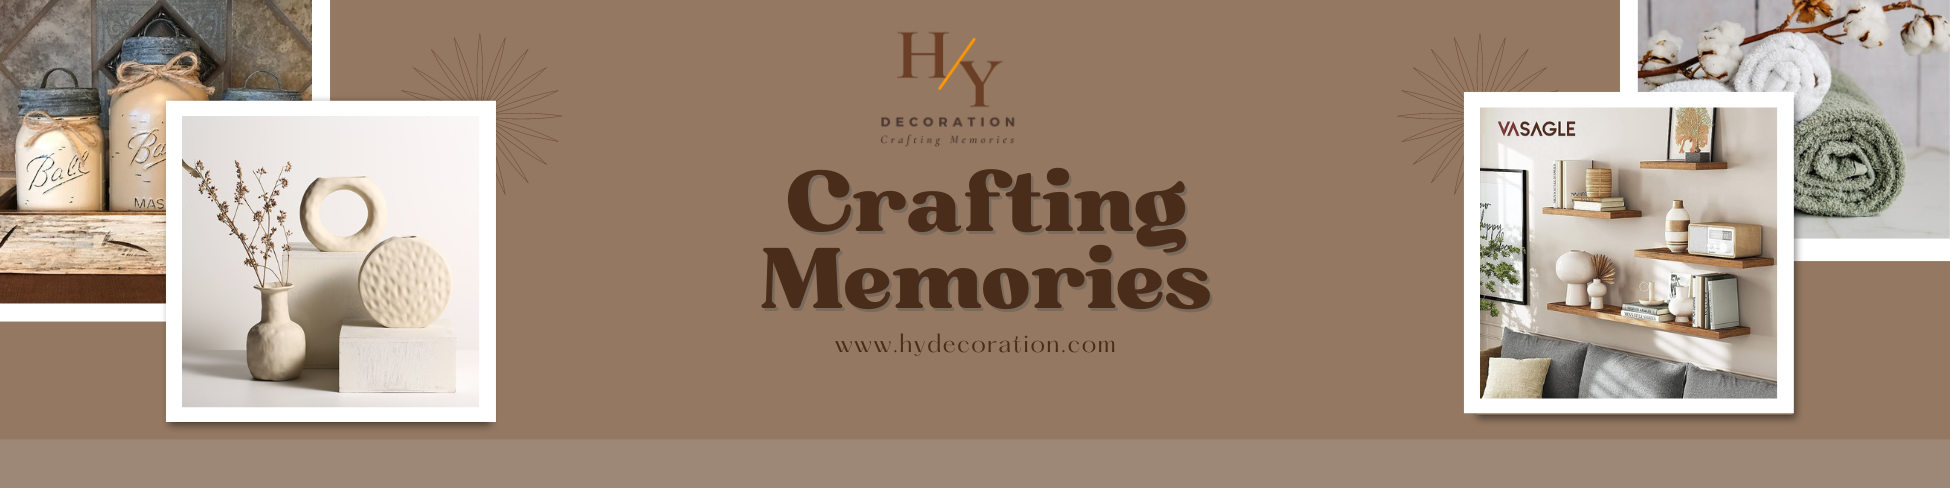 HY decoratoin about us content